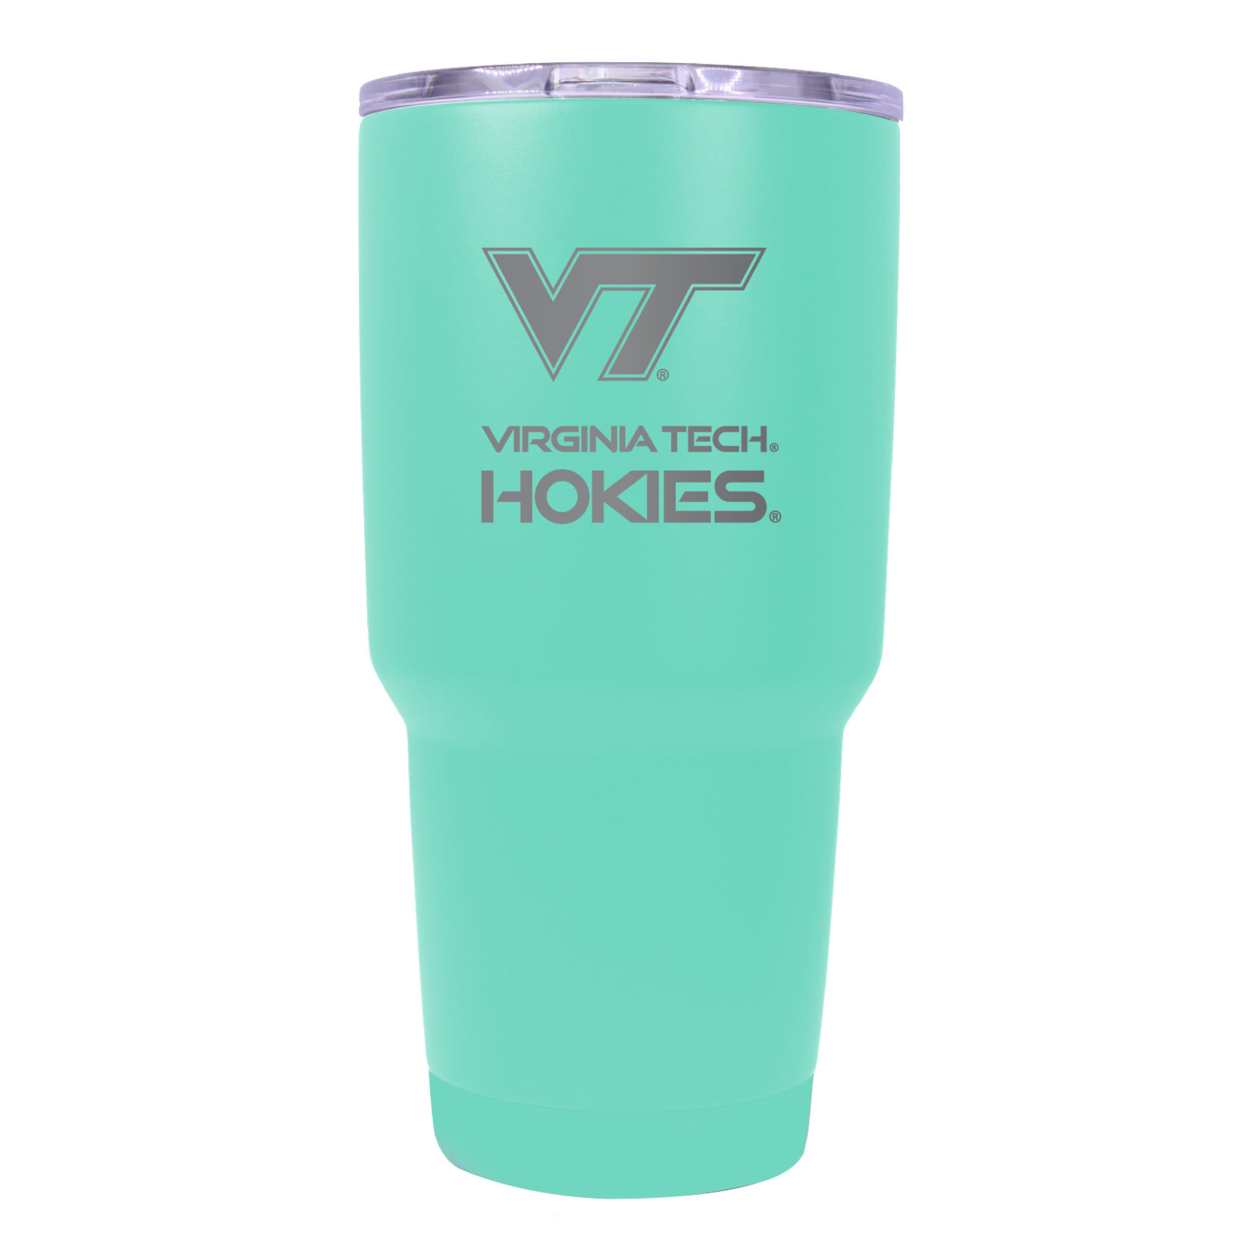 Virginia Tech Hokies 24 Oz Insulated Tumbler Etched - Choose Your Color - Coral